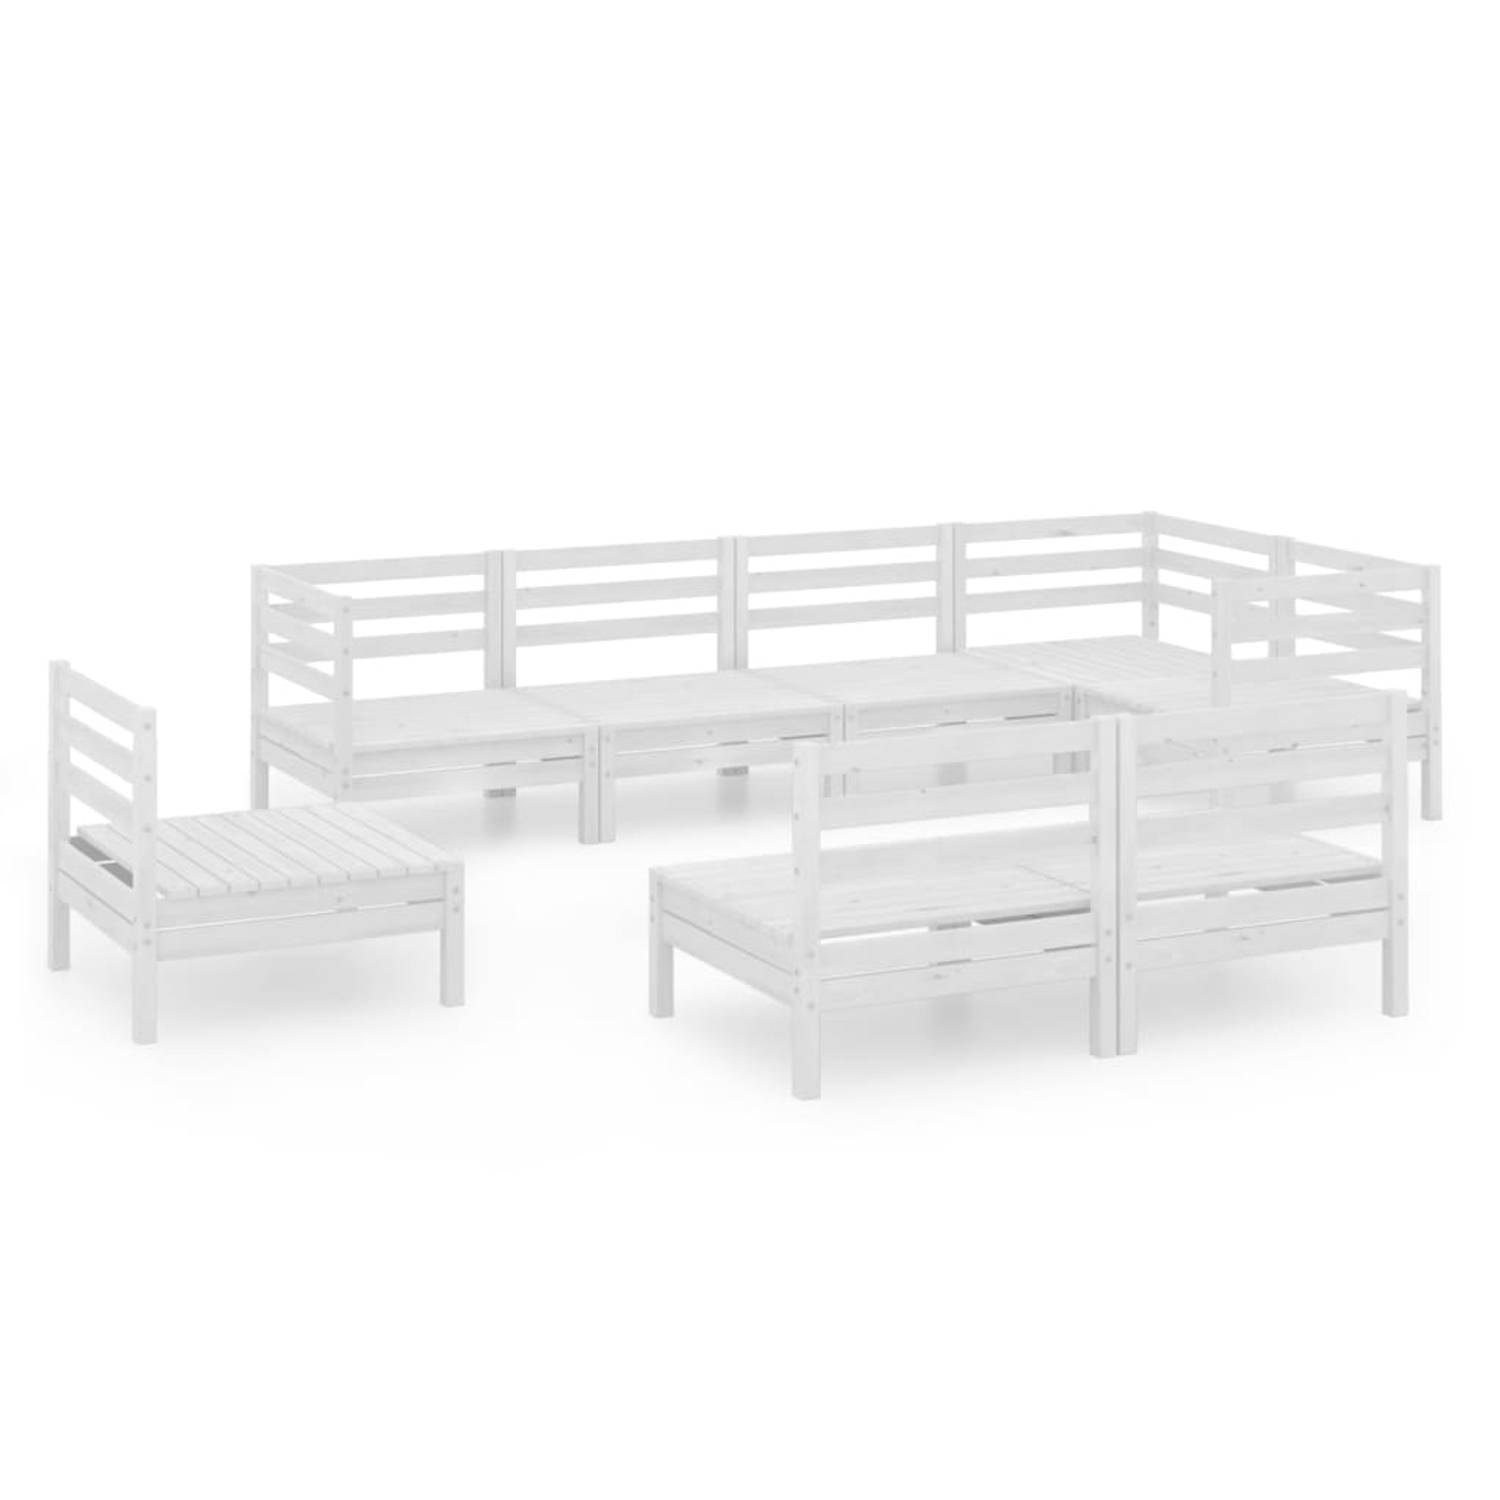 The Living Store Tuinmeubelset - Grenenhout - Wit - 63.5 x 63.5 x 62.5 cm - Modulair design